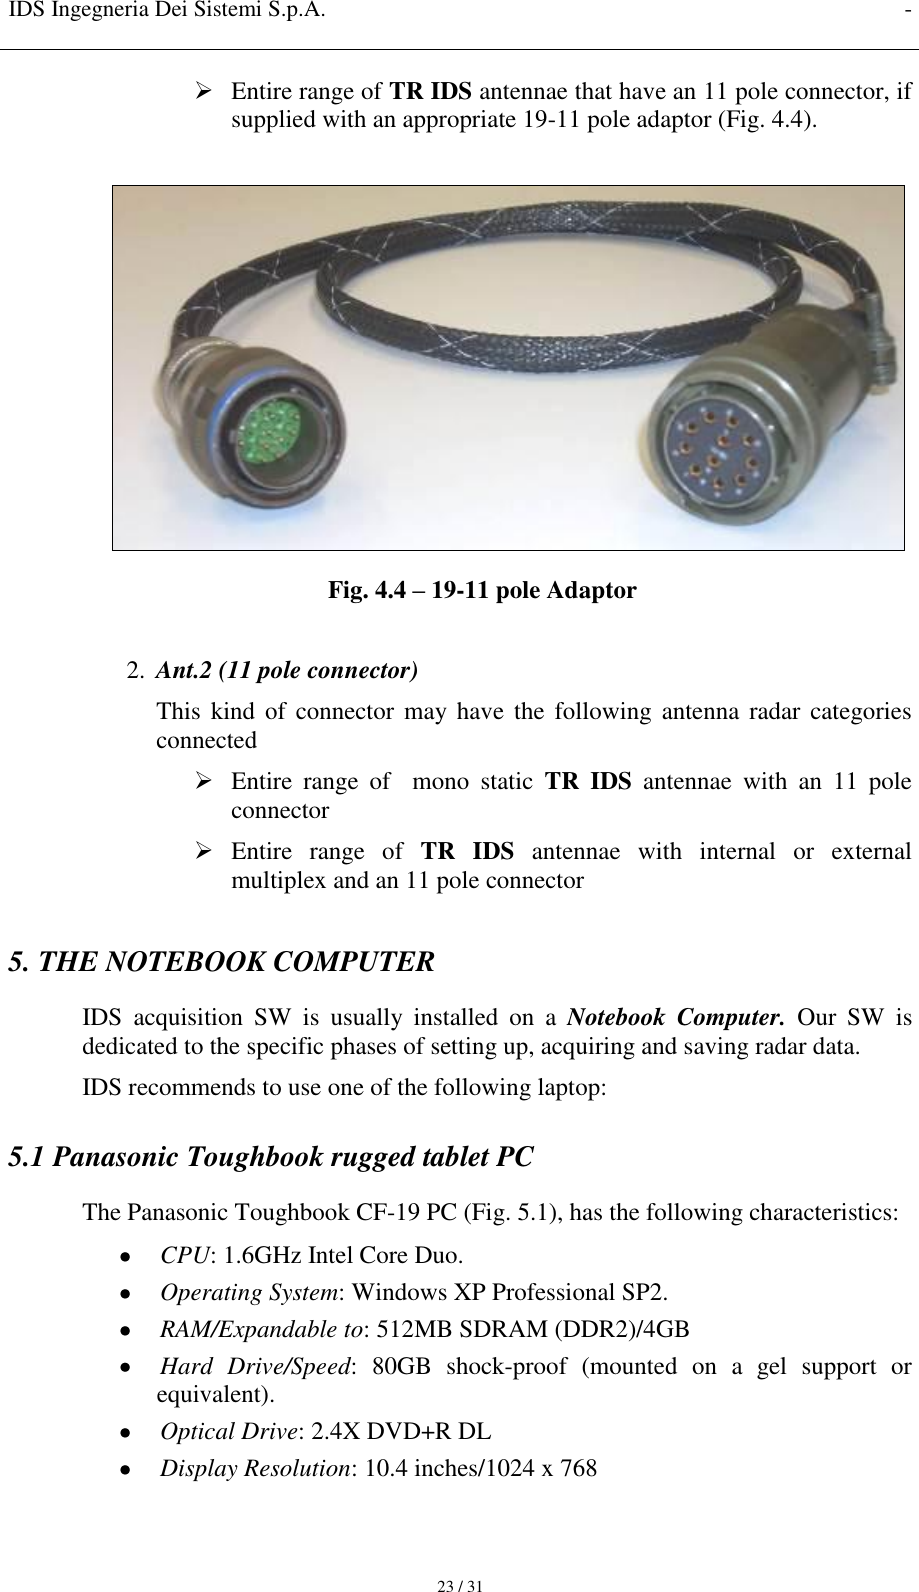 IDS Ingegneria Dei Sistemi S.p.A. -     23 / 31  Entire range of TR IDS antennae that have an 11 pole connector, if supplied with an appropriate 19-11 pole adaptor (Fig. 4.4).   Fig. 4.4 – 19-11 pole Adaptor  2. Ant.2 (11 pole connector) This  kind  of connector may have  the following  antenna radar categories connected  Entire  range  of    mono  static  TR  IDS  antennae  with  an  11  pole connector   Entire  range  of  TR  IDS  antennae  with  internal  or  external multiplex and an 11 pole connector  5. THE NOTEBOOK COMPUTER IDS  acquisition  SW  is  usually  installed  on  a  Notebook  Computer.  Our  SW  is dedicated to the specific phases of setting up, acquiring and saving radar data. IDS recommends to use one of the following laptop: 5.1 Panasonic Toughbook rugged tablet PC The Panasonic Toughbook CF-19 PC (Fig. 5.1), has the following characteristics:  CPU: 1.6GHz Intel Core Duo.  Operating System: Windows XP Professional SP2.  RAM/Expandable to: 512MB SDRAM (DDR2)/4GB  Hard  Drive/Speed:  80GB  shock-proof  (mounted  on  a  gel  support  or equivalent).  Optical Drive: 2.4X DVD+R DL  Display Resolution: 10.4 inches/1024 x 768 